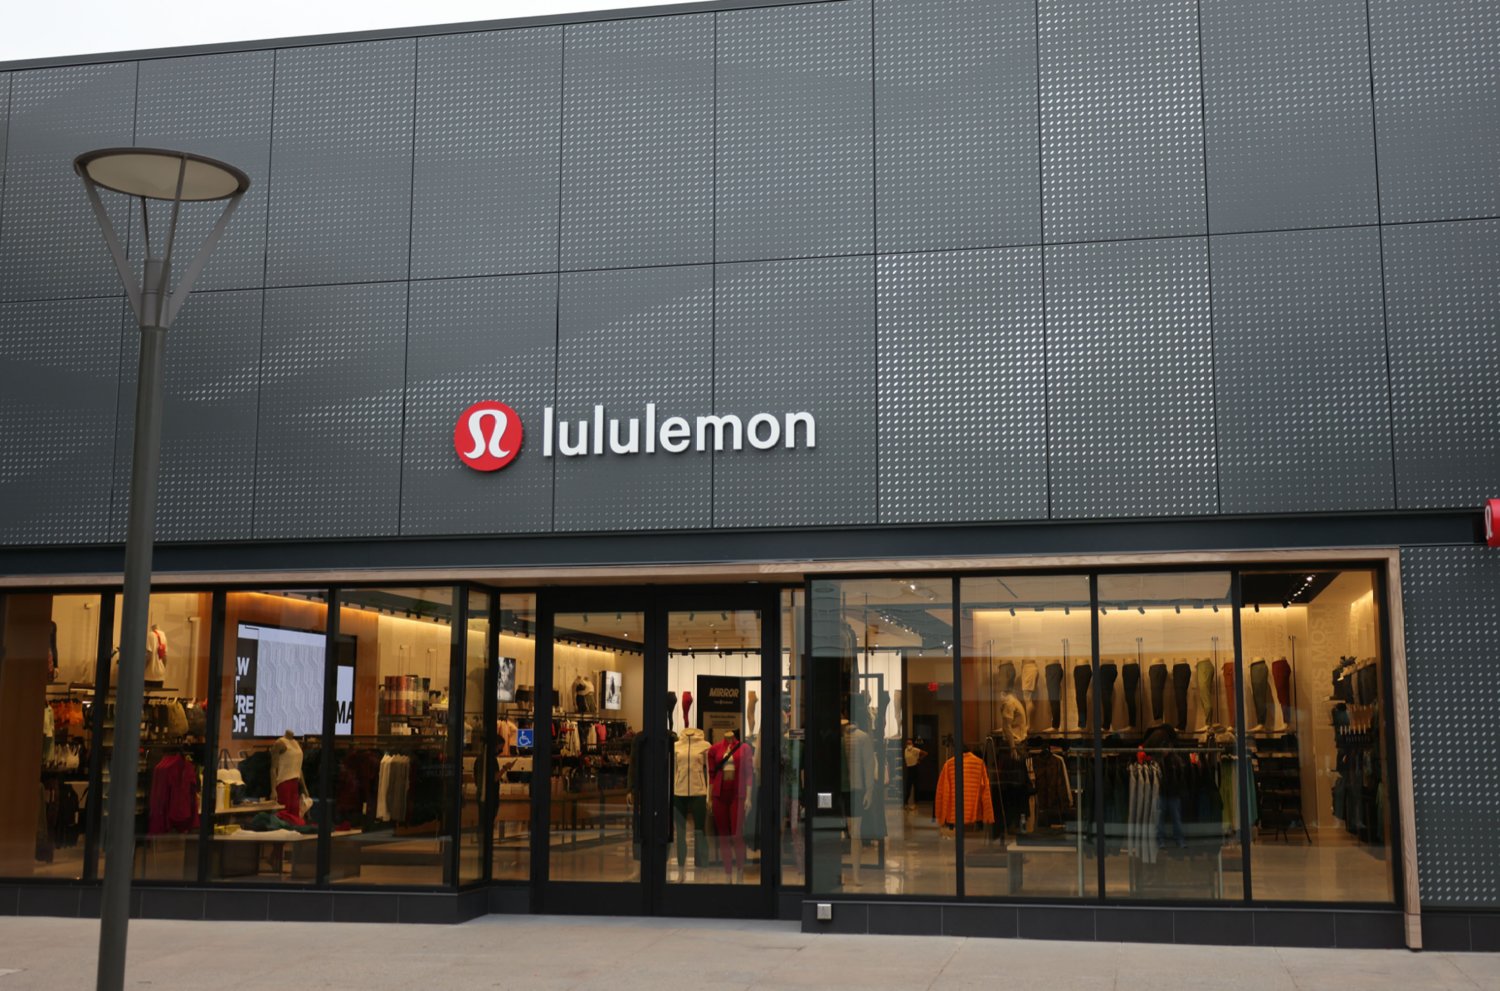 A new Lululemon store is opening up at Renaissance at Colony Park.